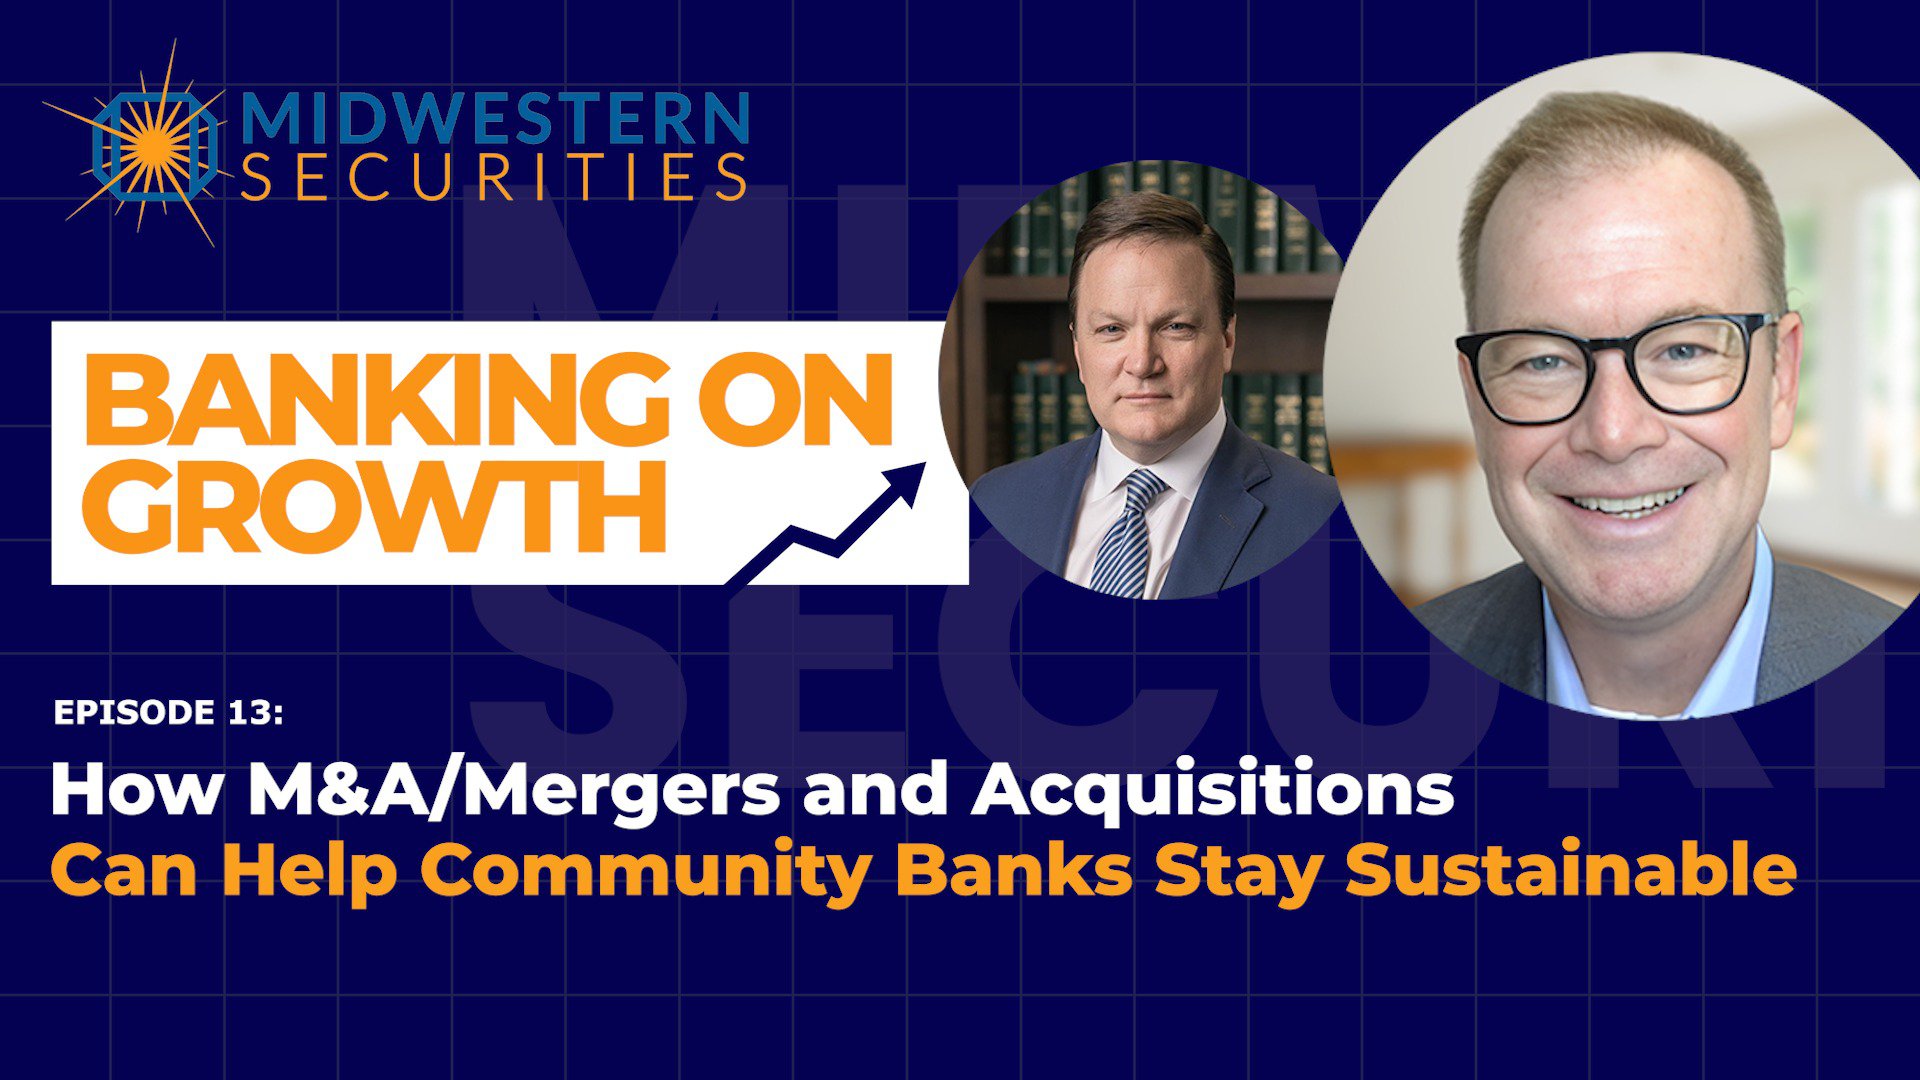 Can M&A/Mergers and Acquisitions Help Community Banks Stay Sustainable?